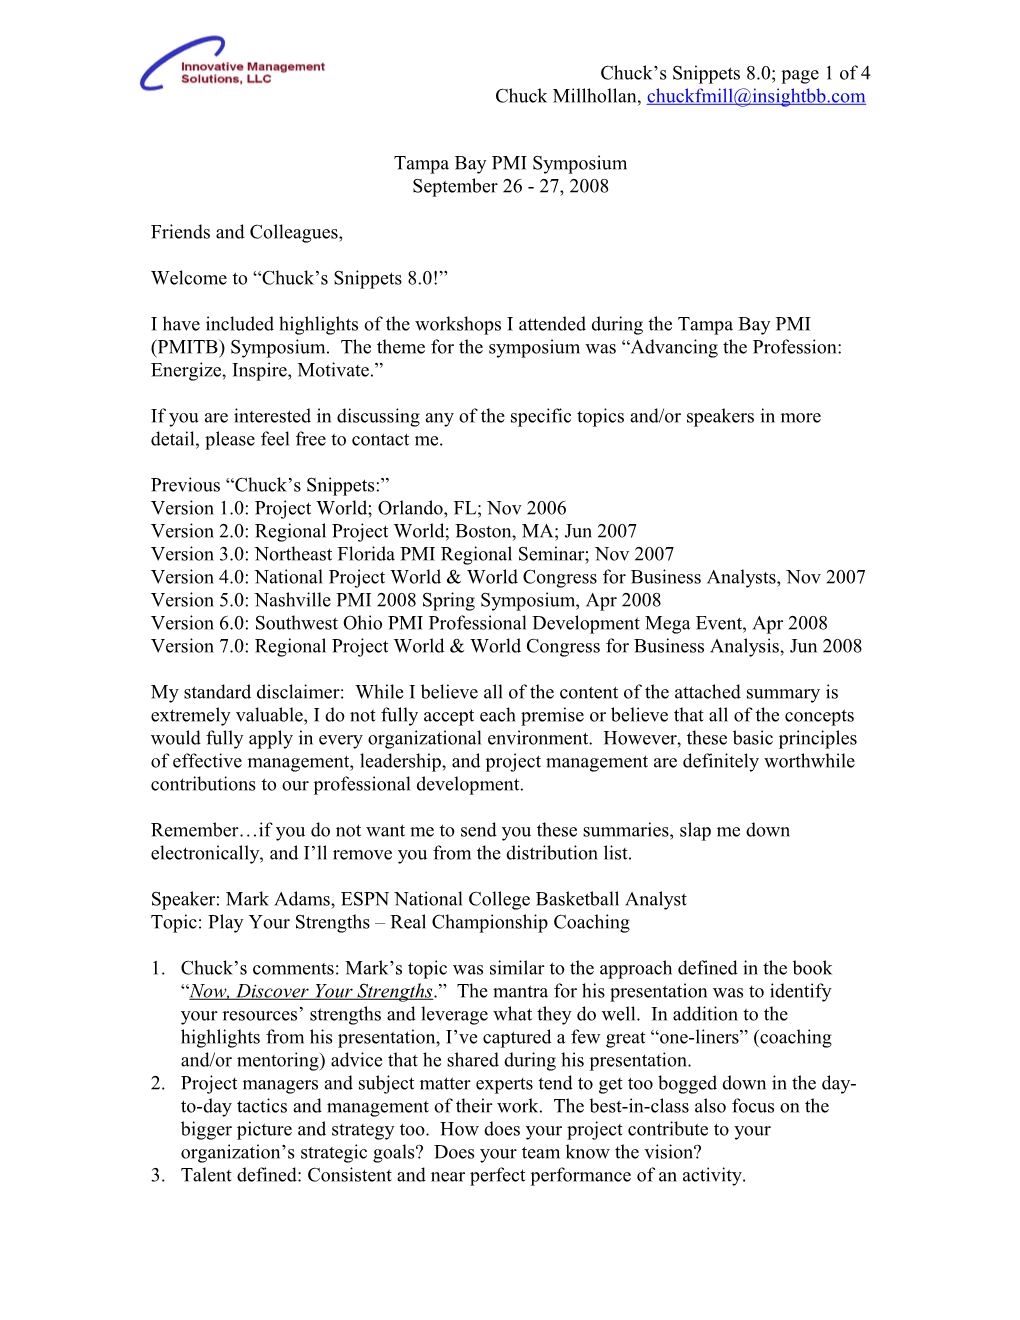 Chuck S Snippets 8.0; Page 1 of 4